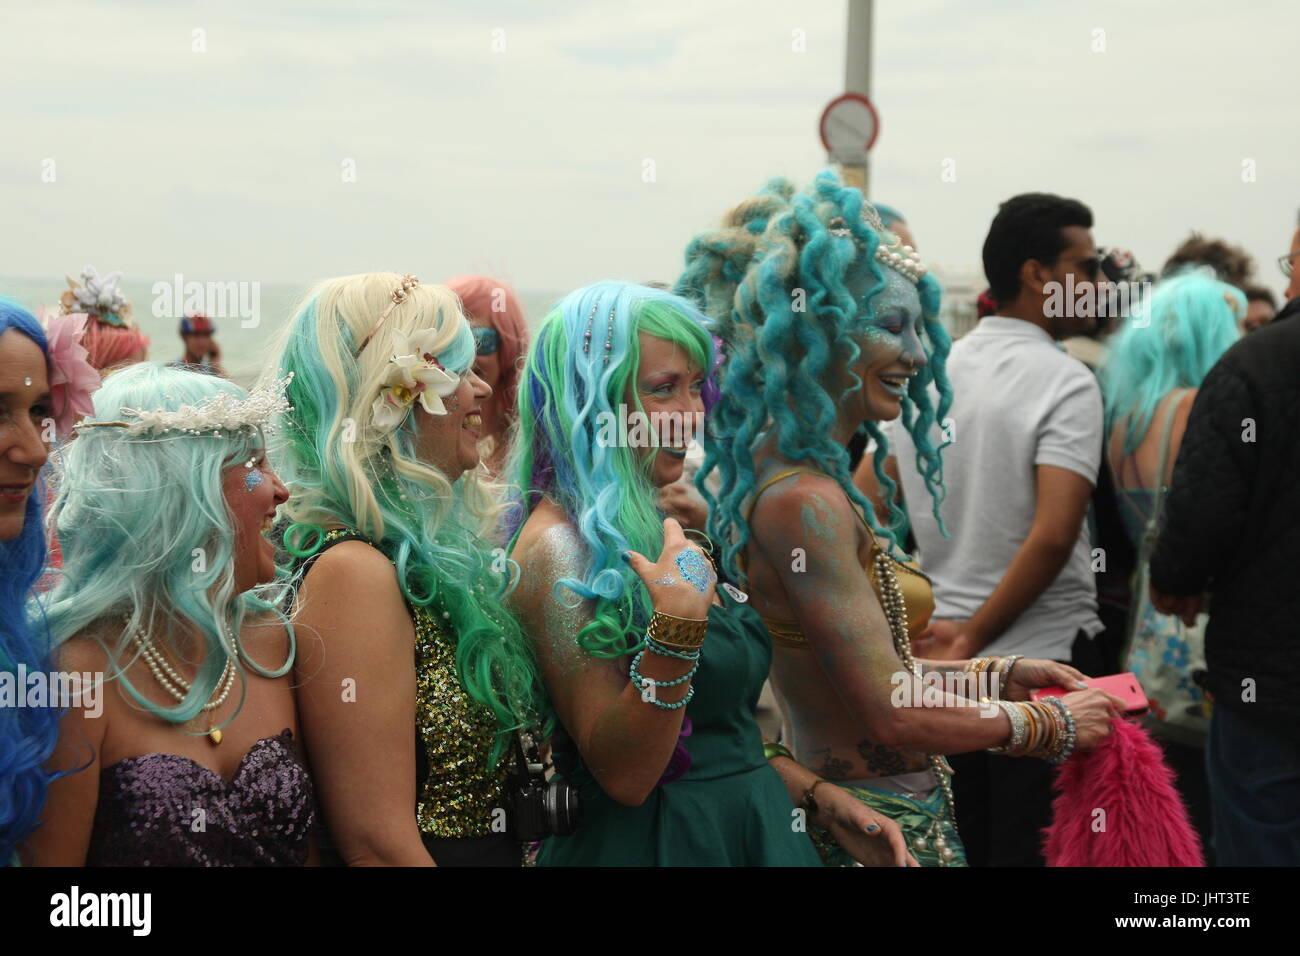 Brighton, UK, 15th July 2017. Brighton's annual March of the Mermaids, including this group,  heads along the promenade. Marchers claim to be mermaids who once a year grow legs to take to the land and protest about the condition of the coast. This year's event was held in support of Surfers Against Sewage. Roland Ravenhill/Alamy Live News. Stock Photo